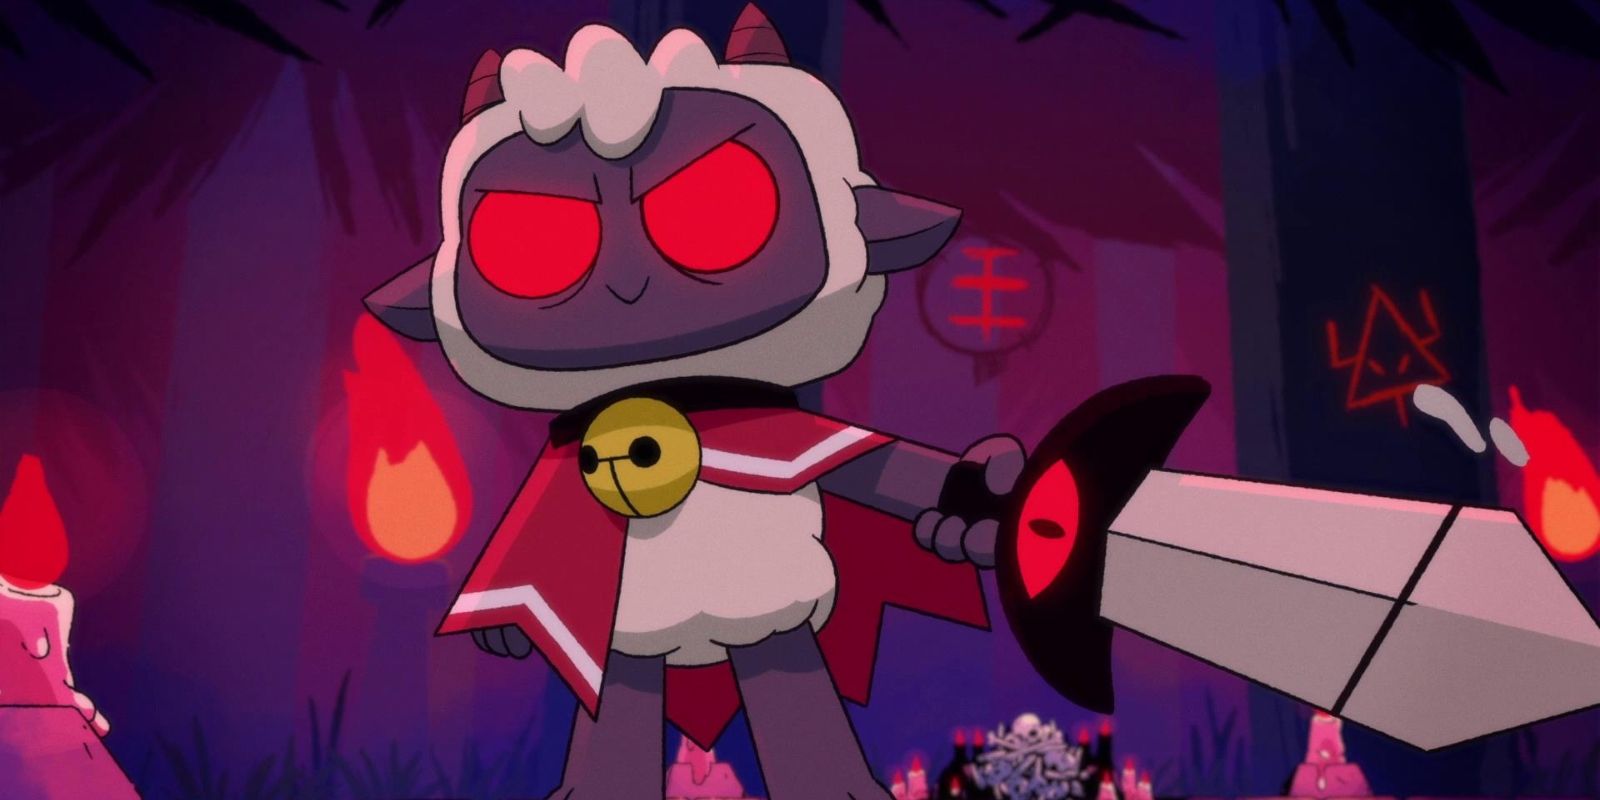 A cartoony lamb with glowing red eyes holding a sword from Devolver Digital's Cult of the Lamb.